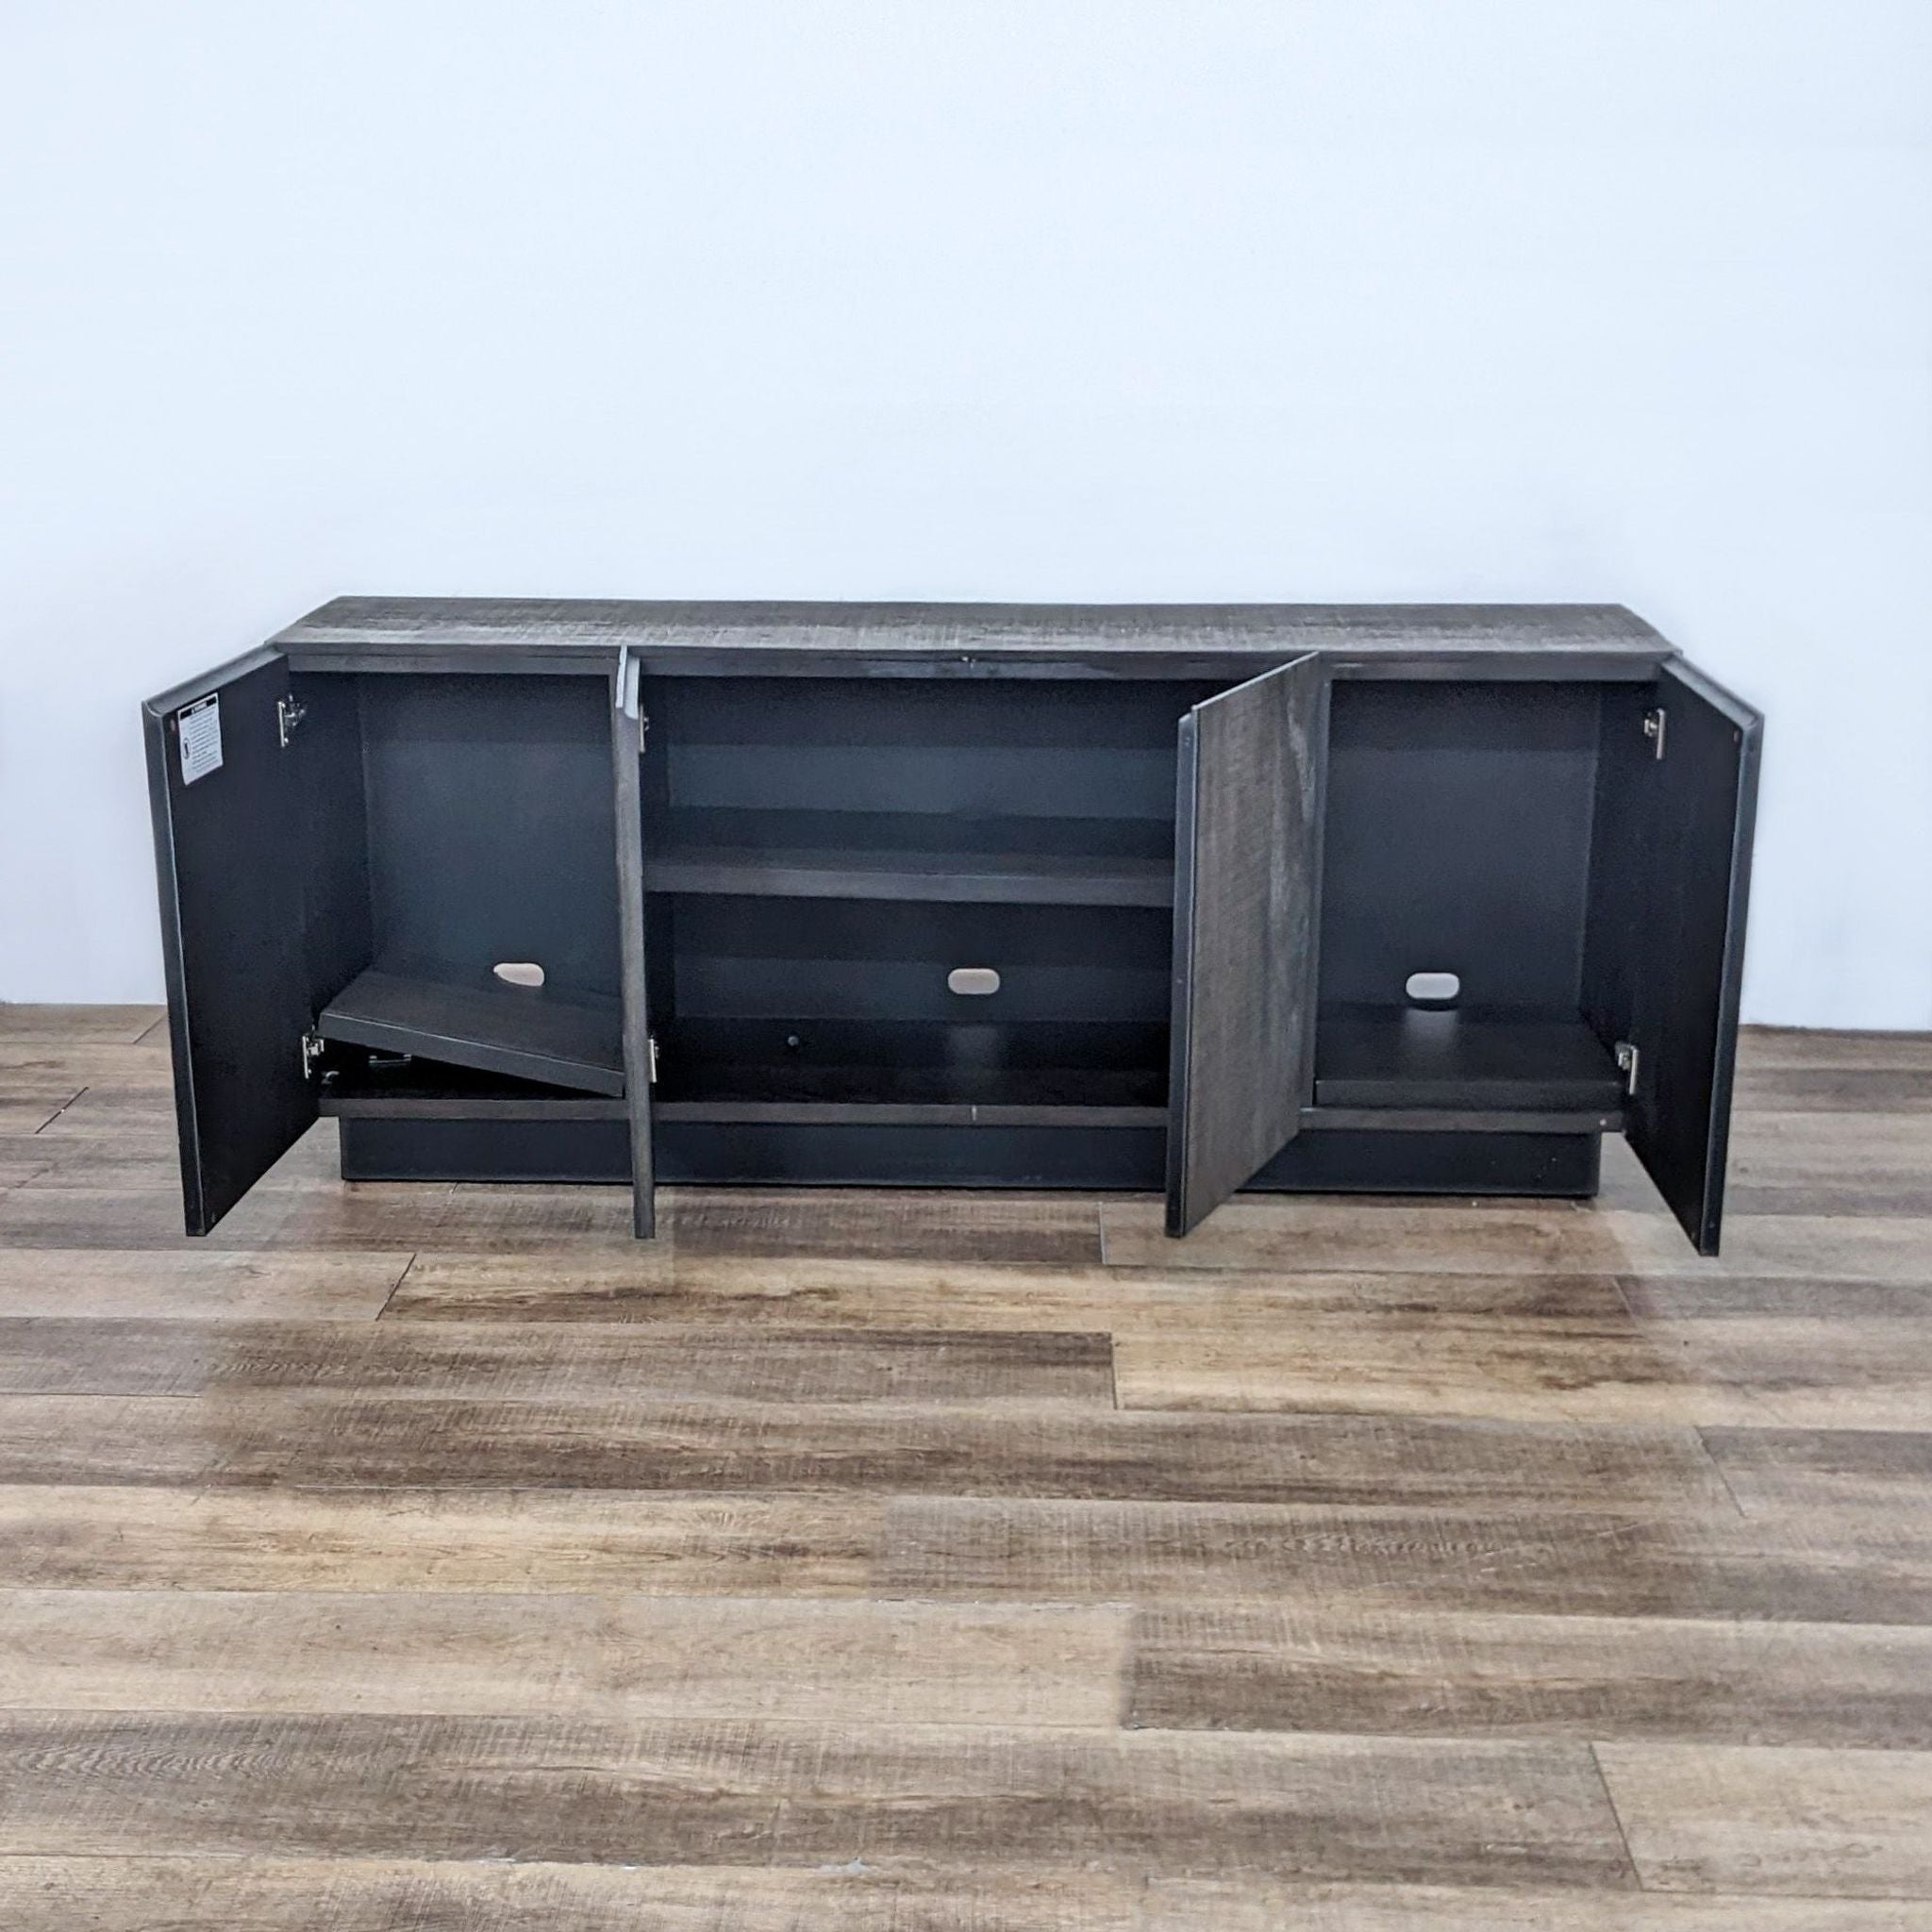 Alt text 2: Open view of a Thomas Bina-designed terra reclaimed peroba sideboard, showing interior shelves and compartments.